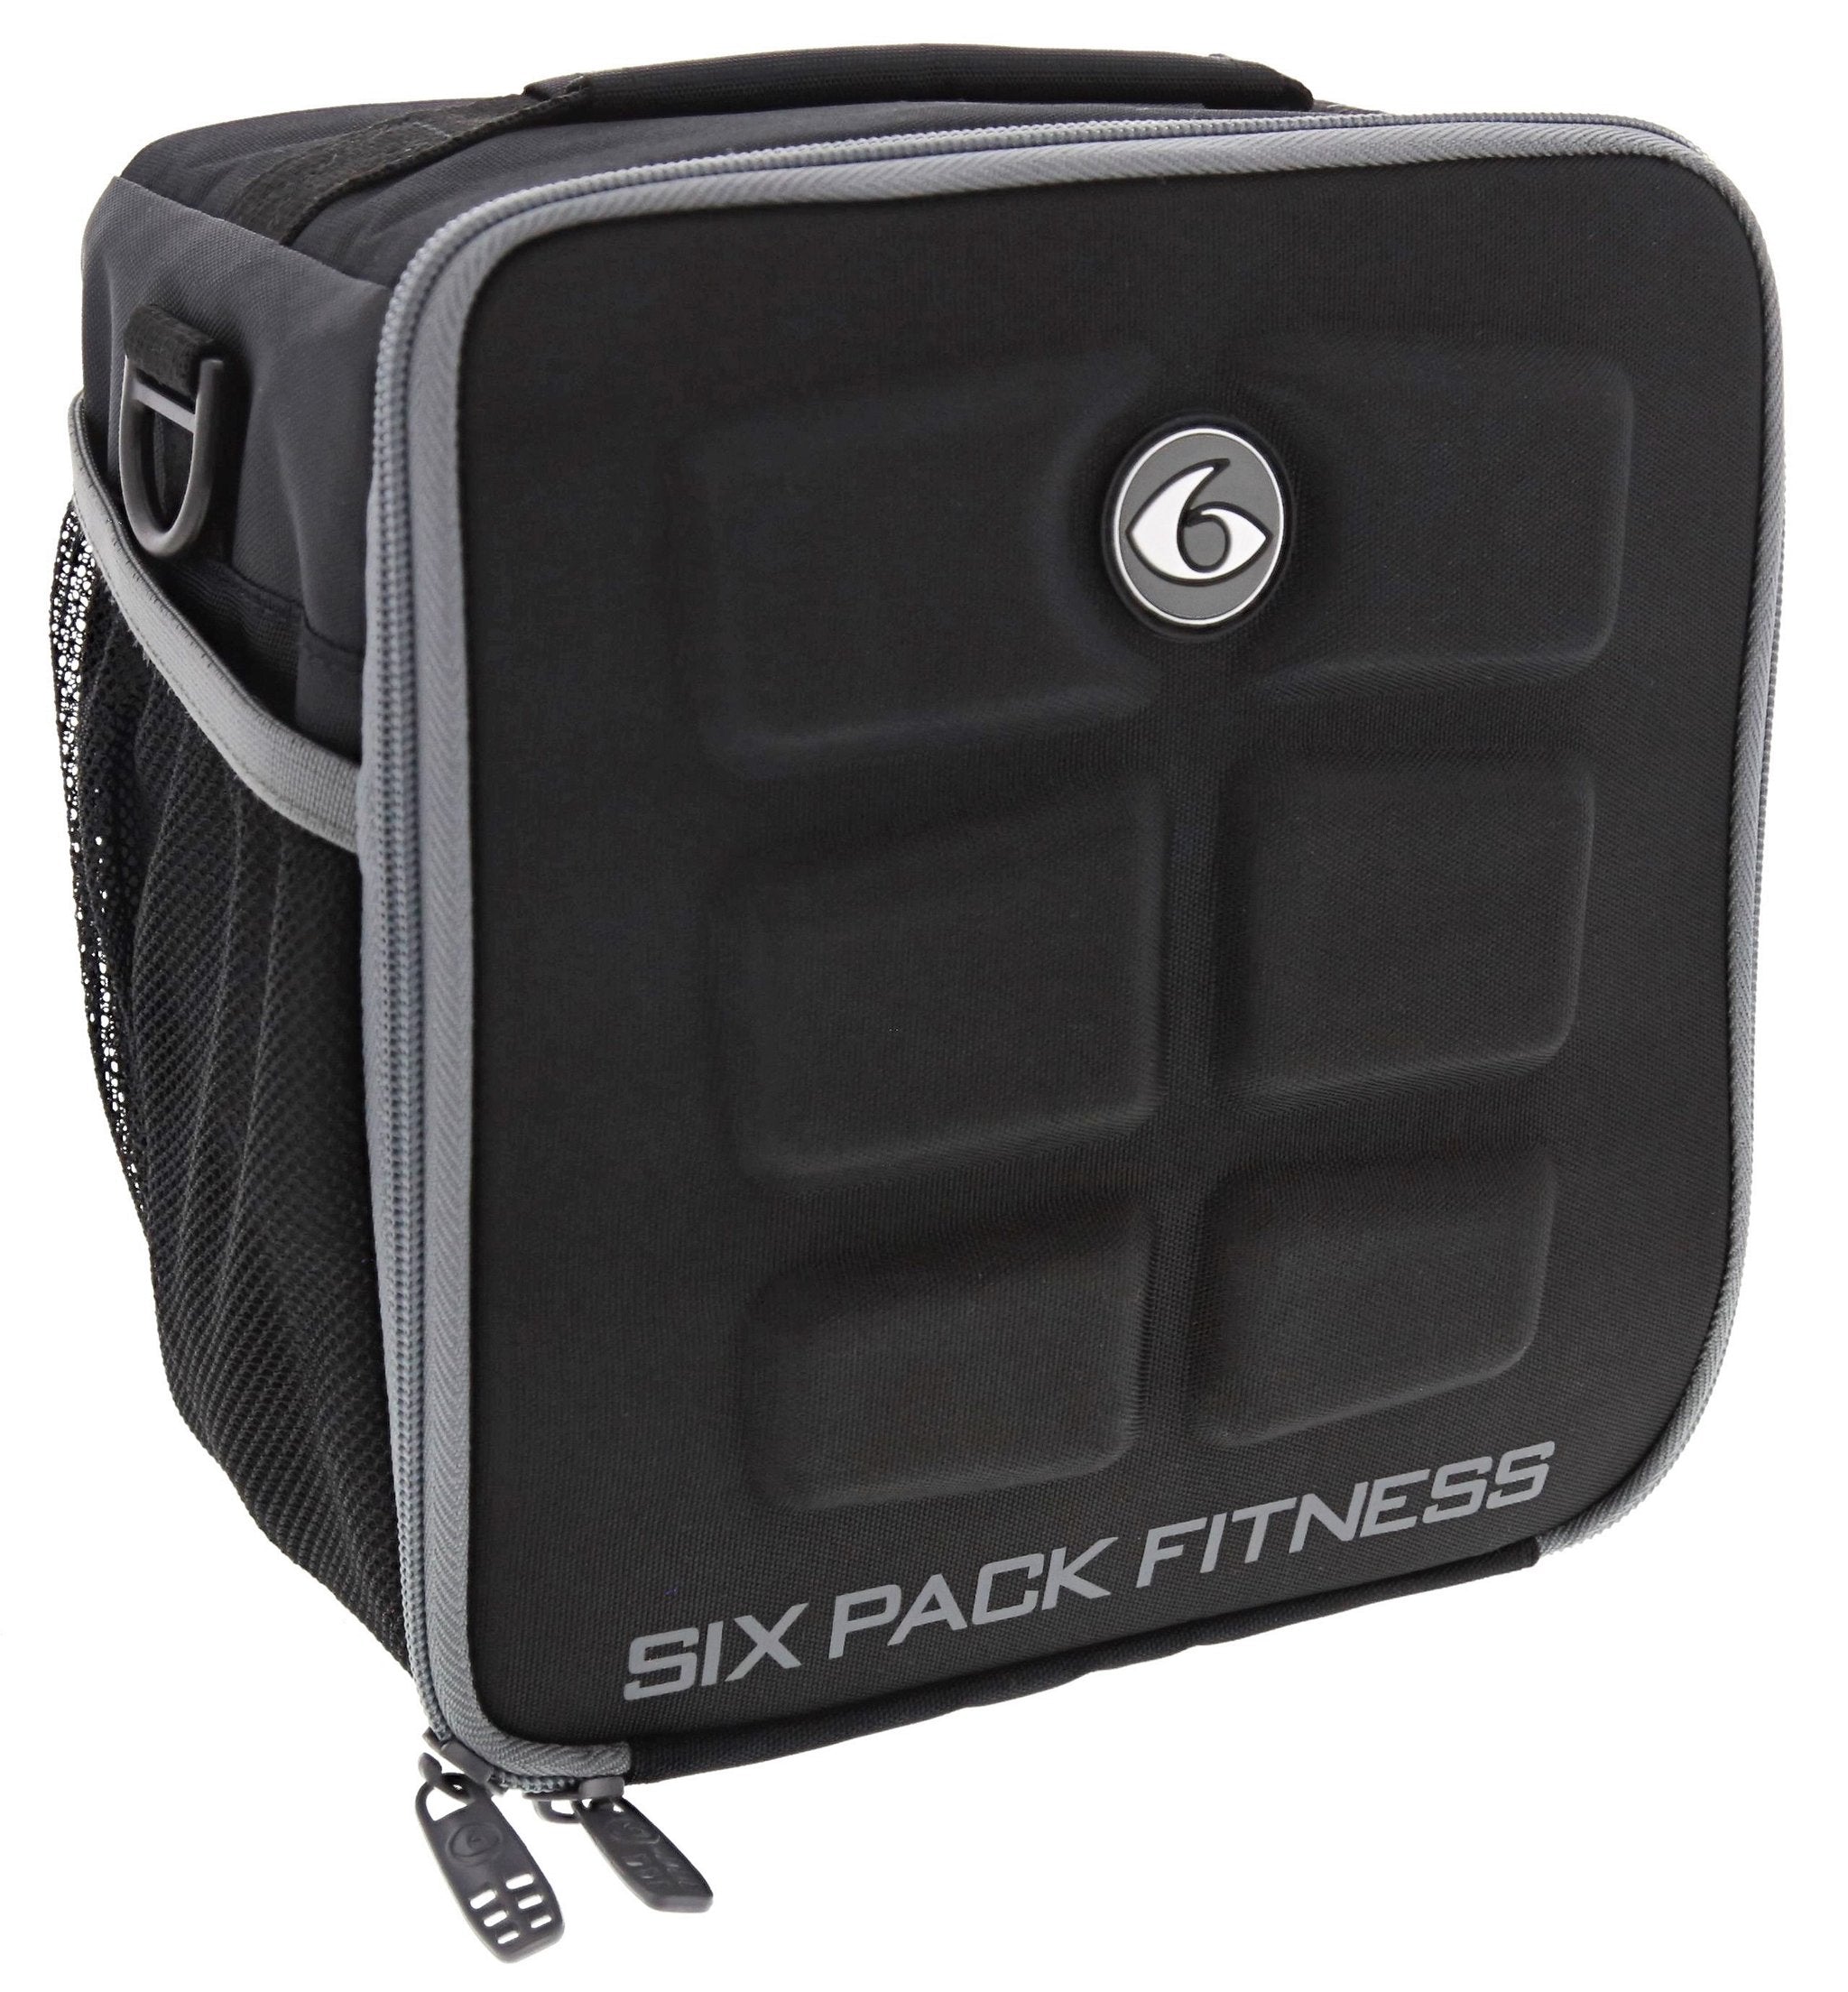 Six Pack Fitness Expedition 300 Backpack - PureBulk, Inc.